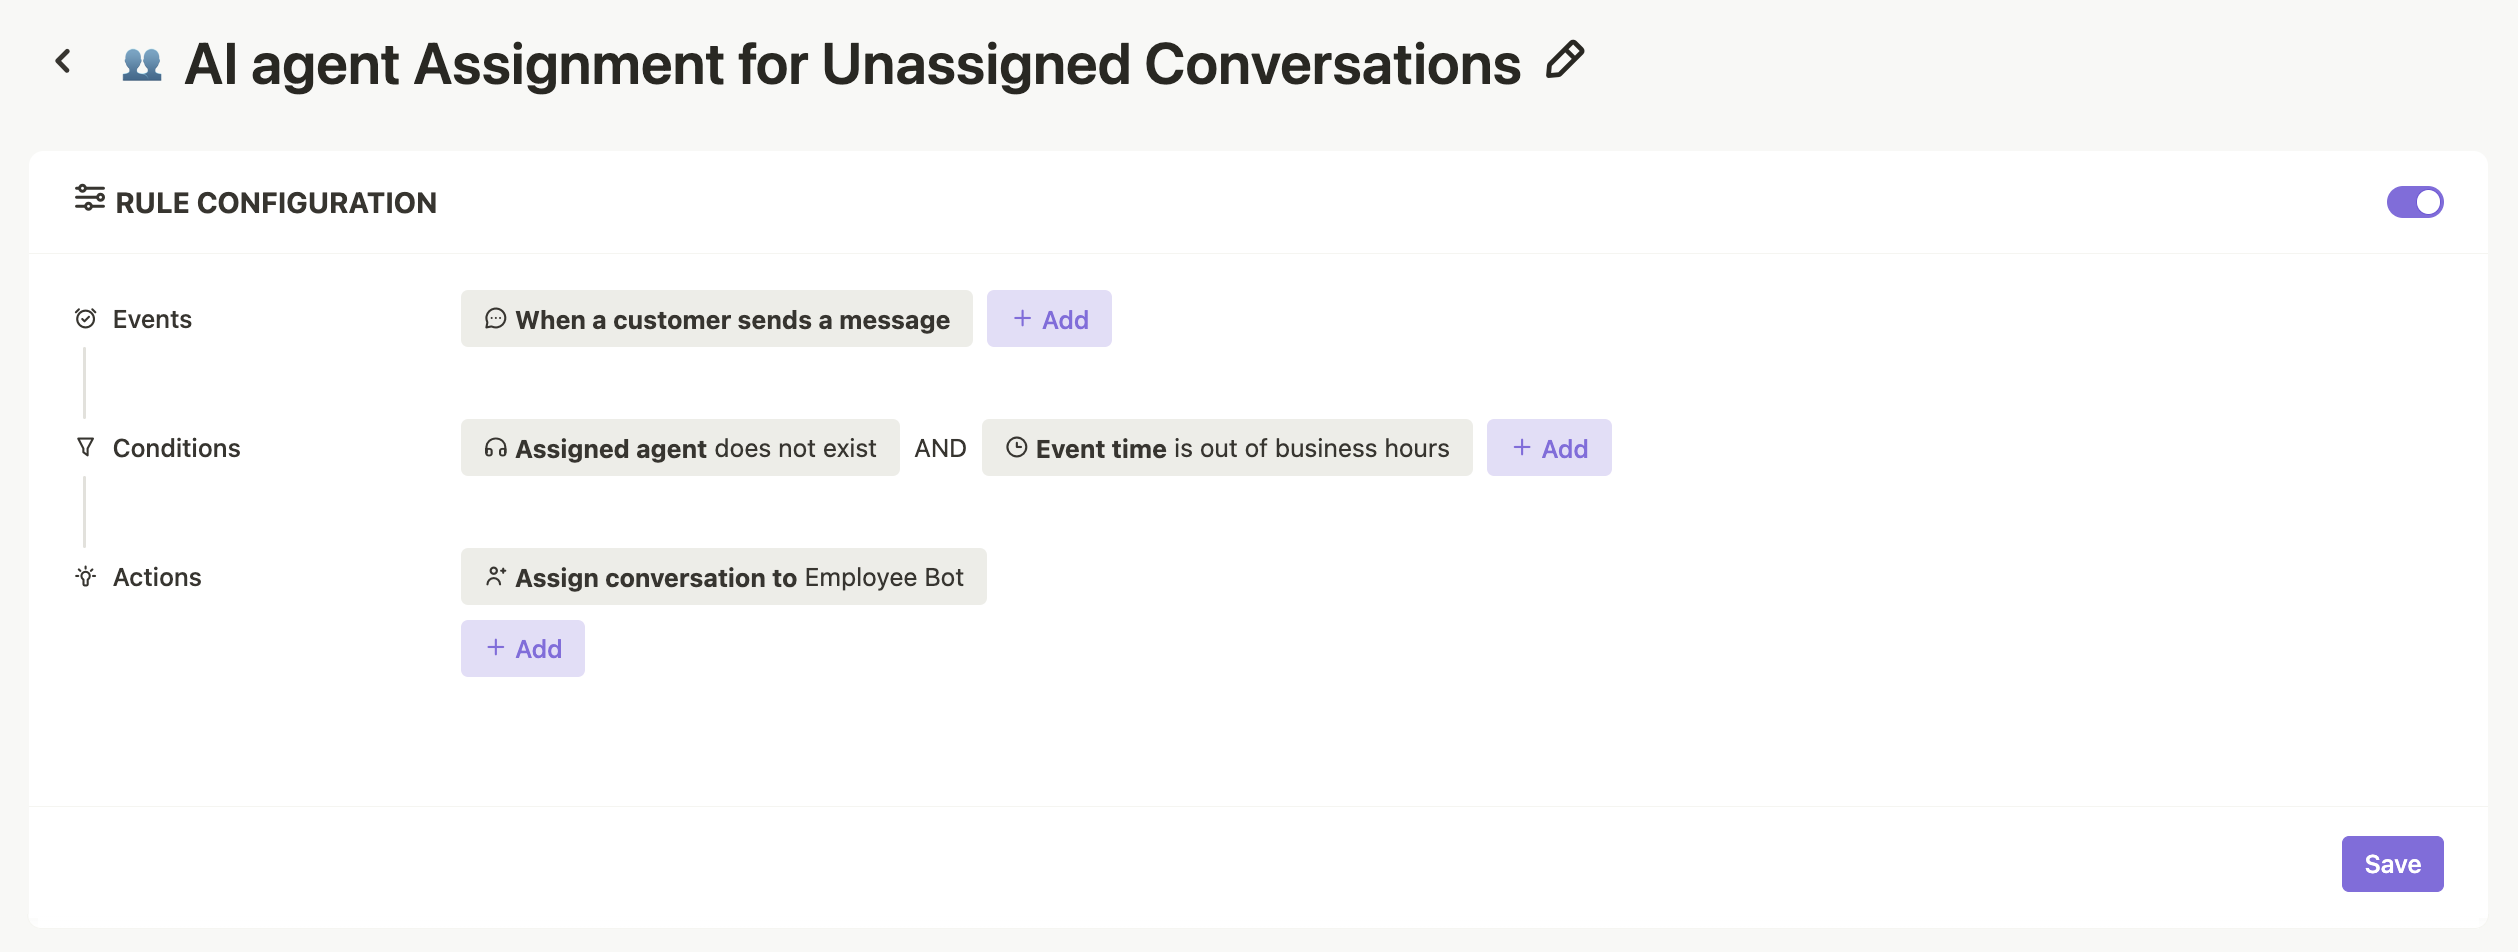 AI Assistant assignment for unassigned conversations